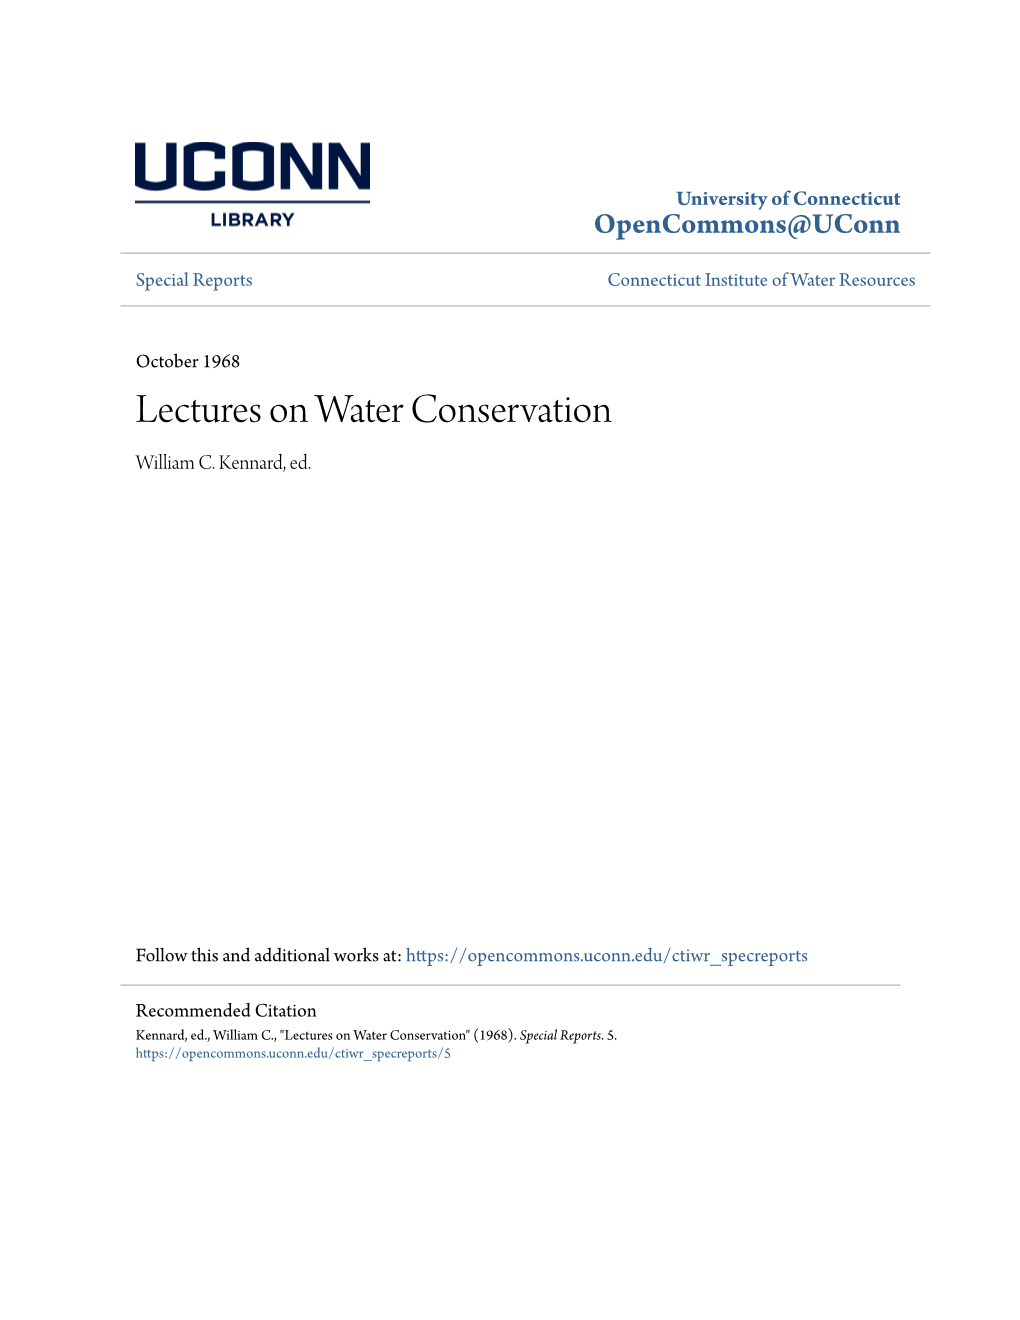 Lectures on Water Conservation William C